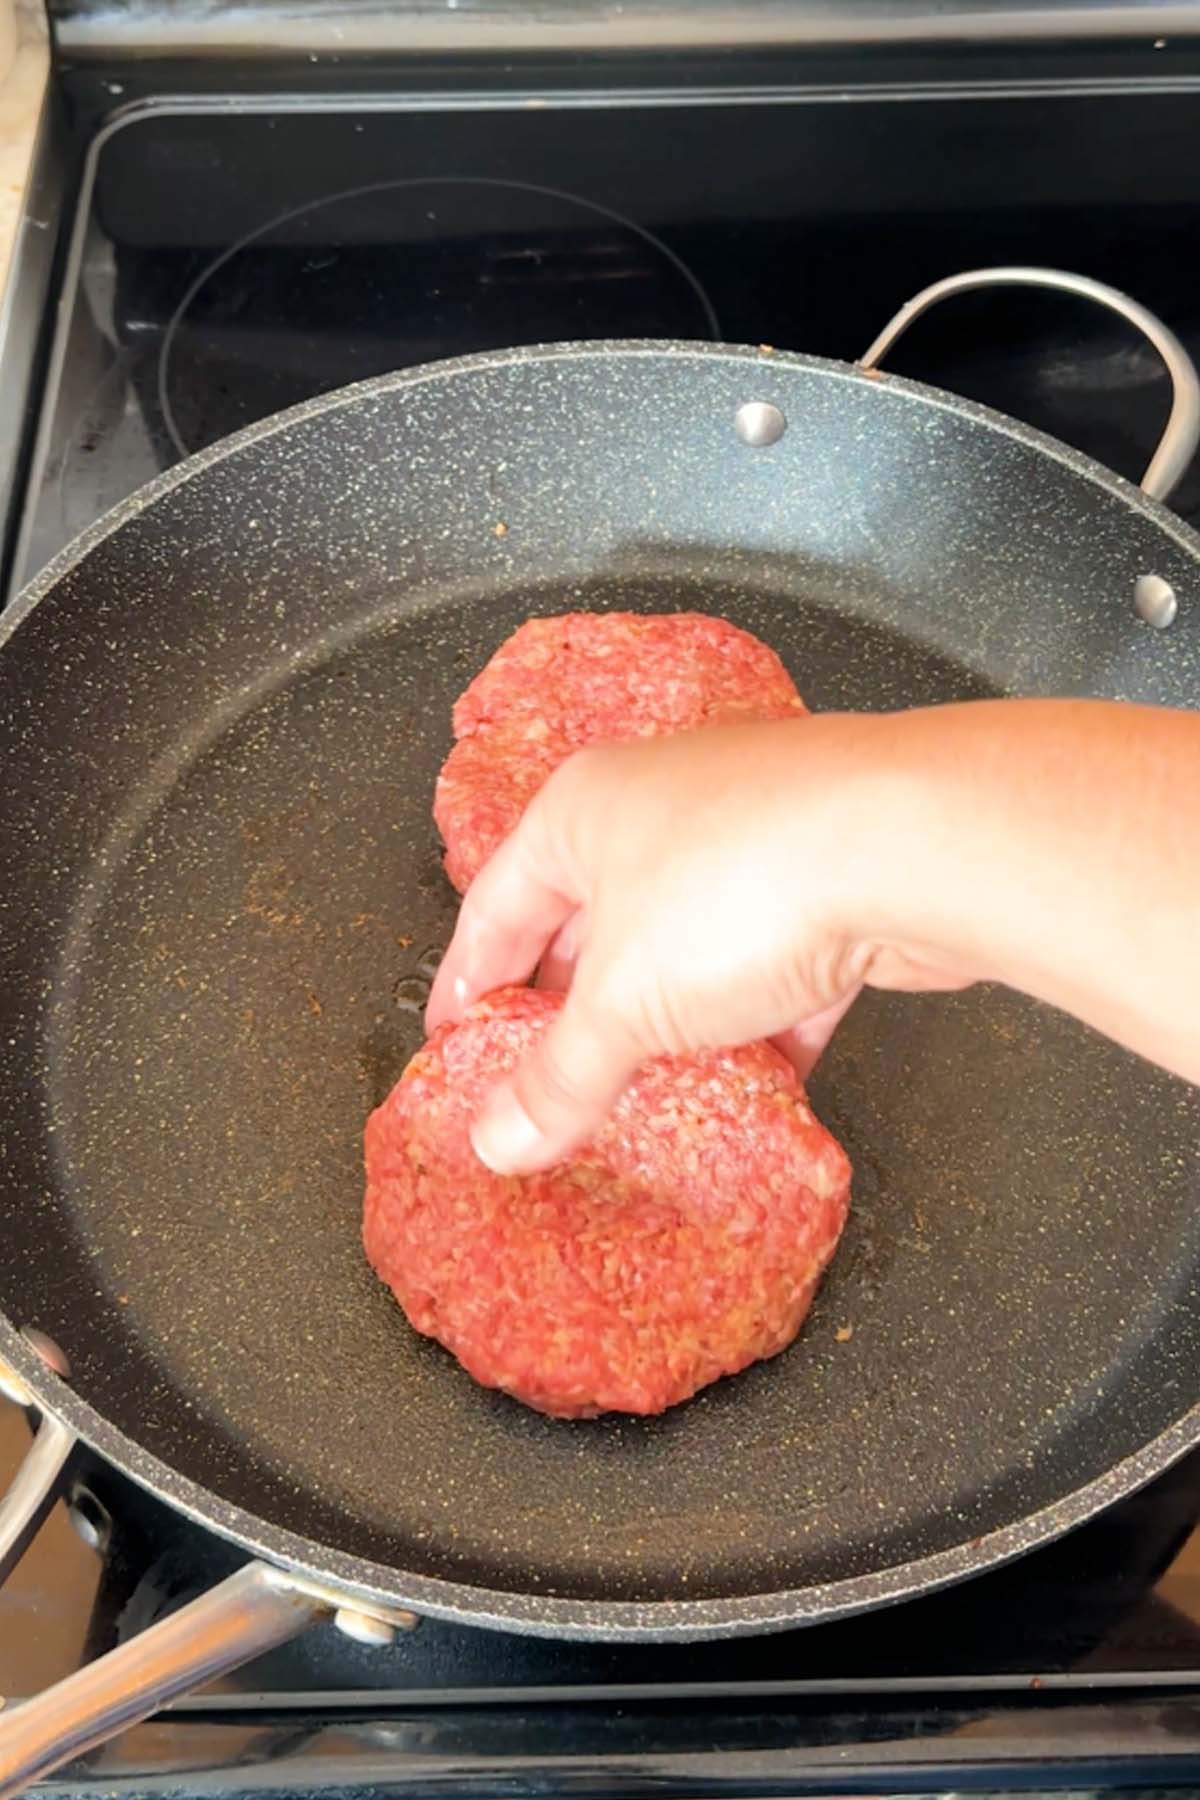 Raw burger patties placed in a skillet.